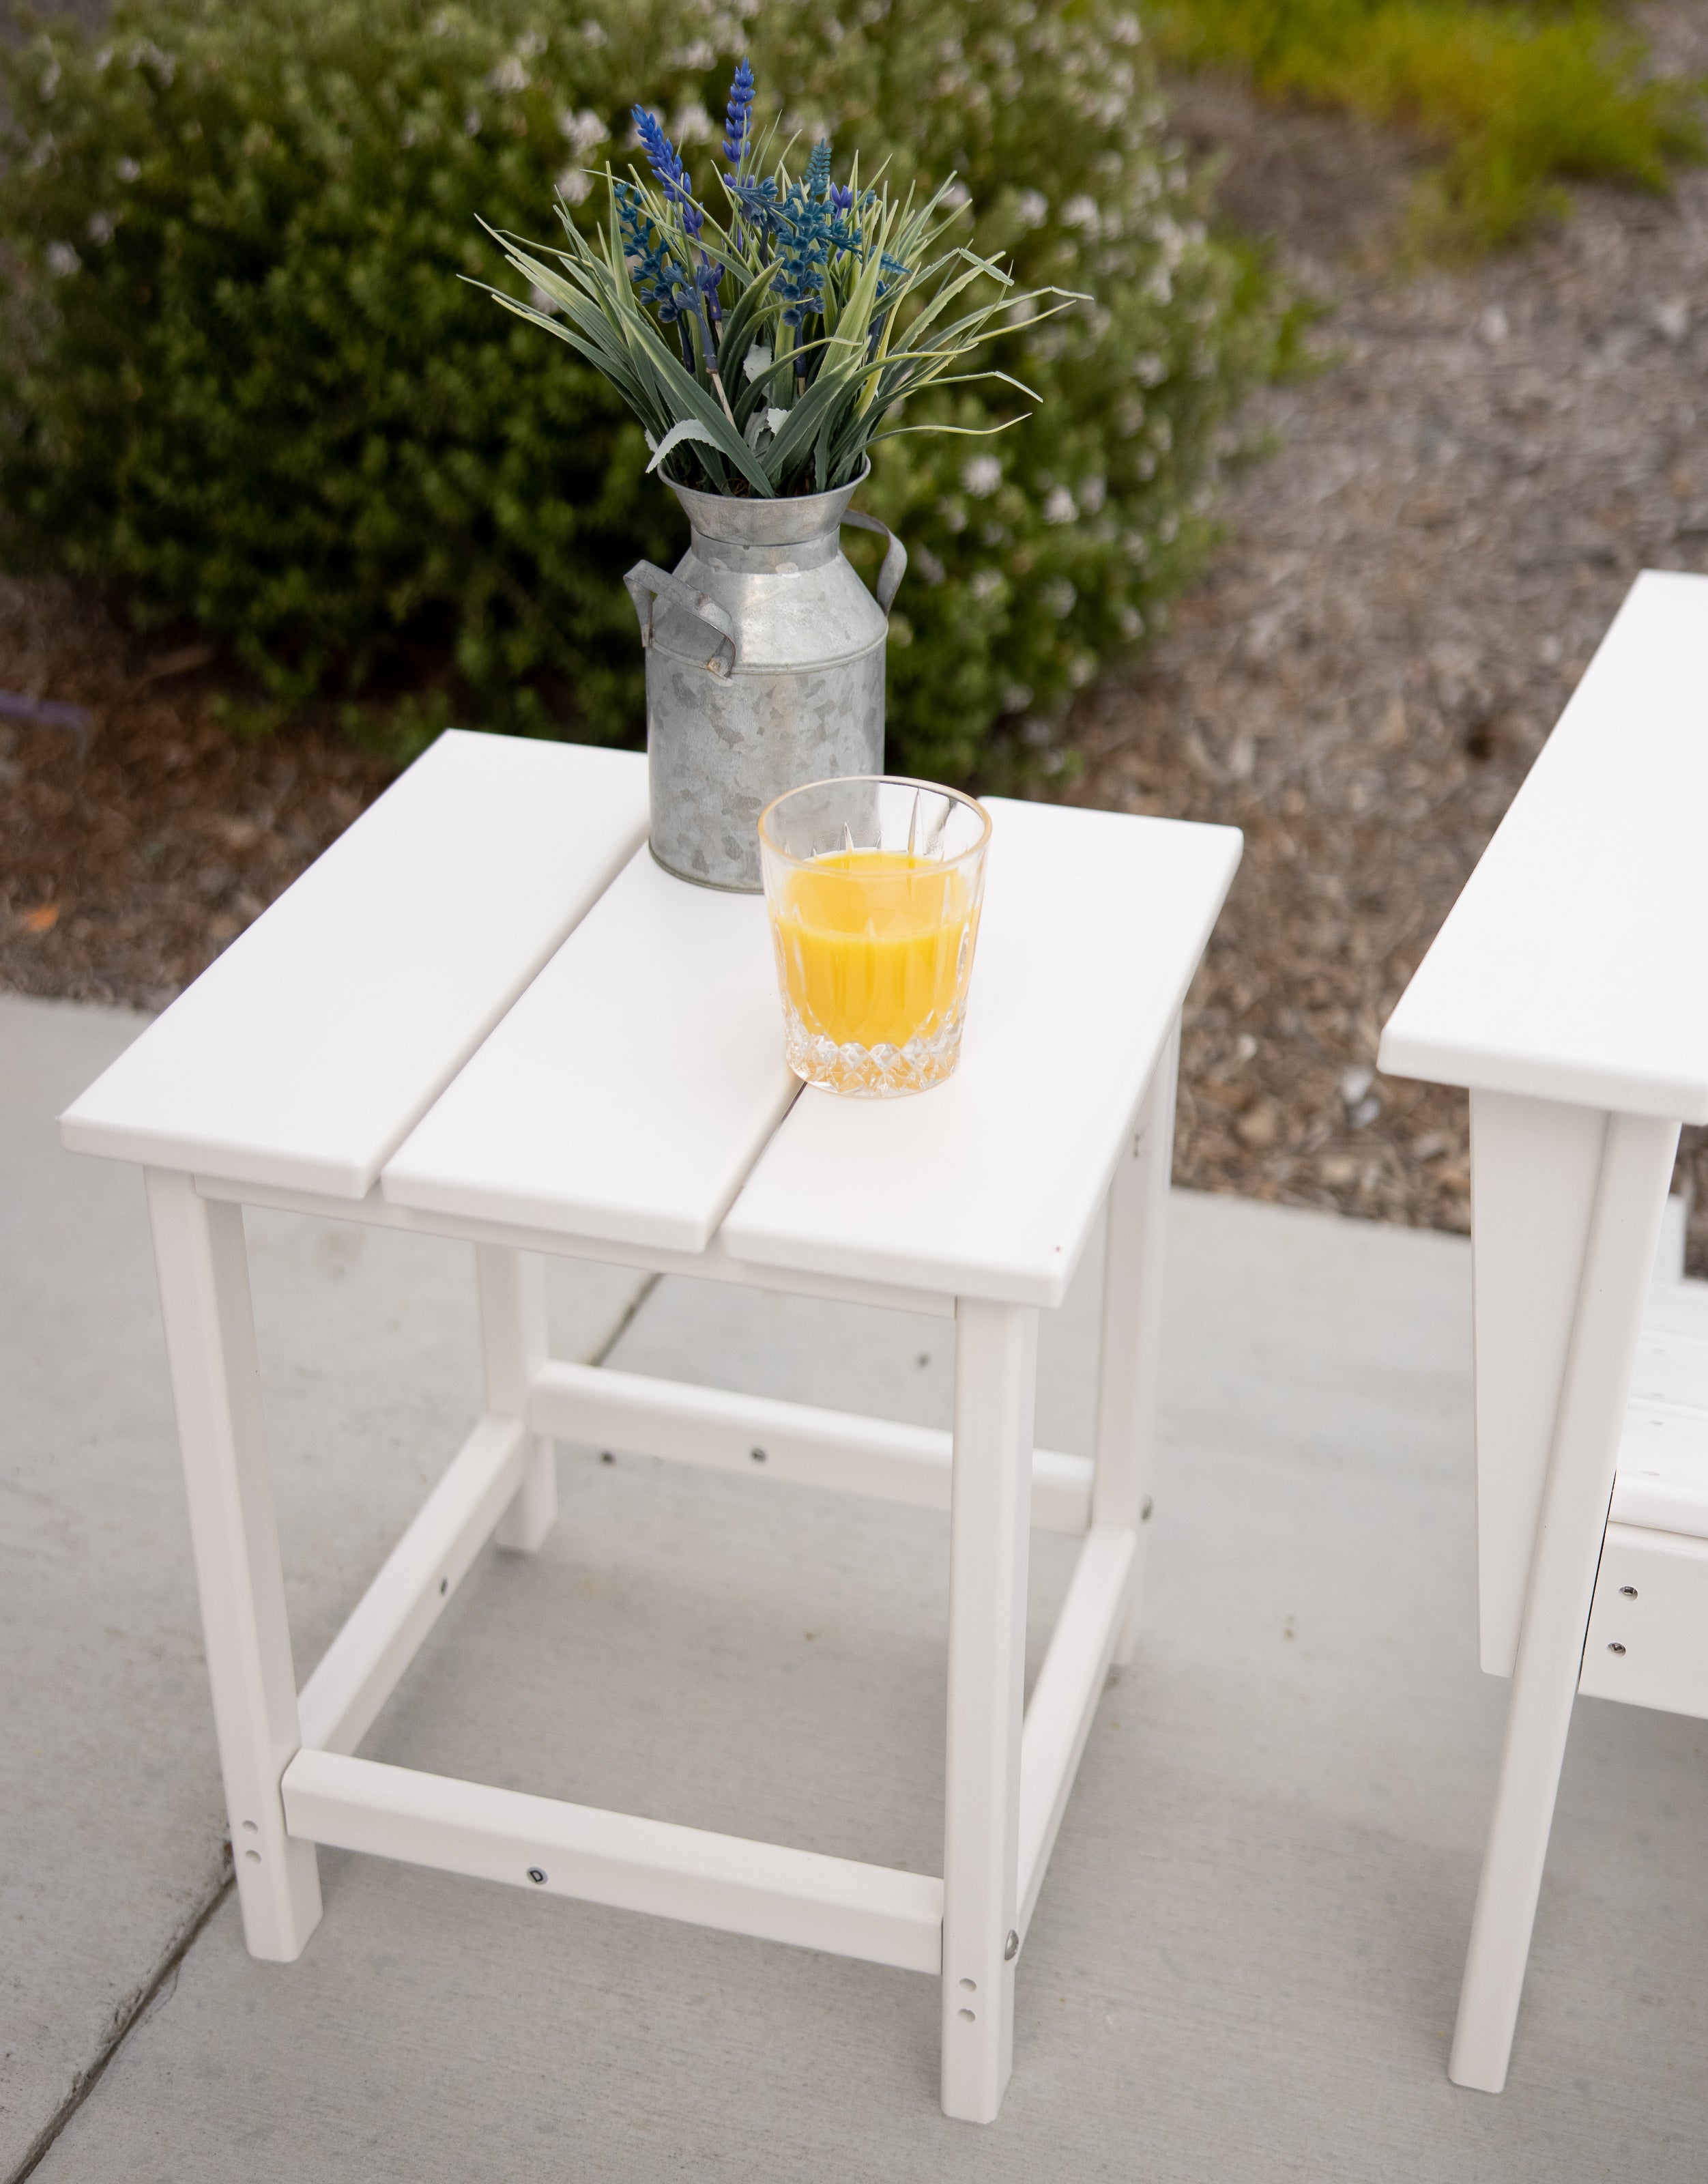 LuXeo Vista Recycled HDPE Plastic Side Table